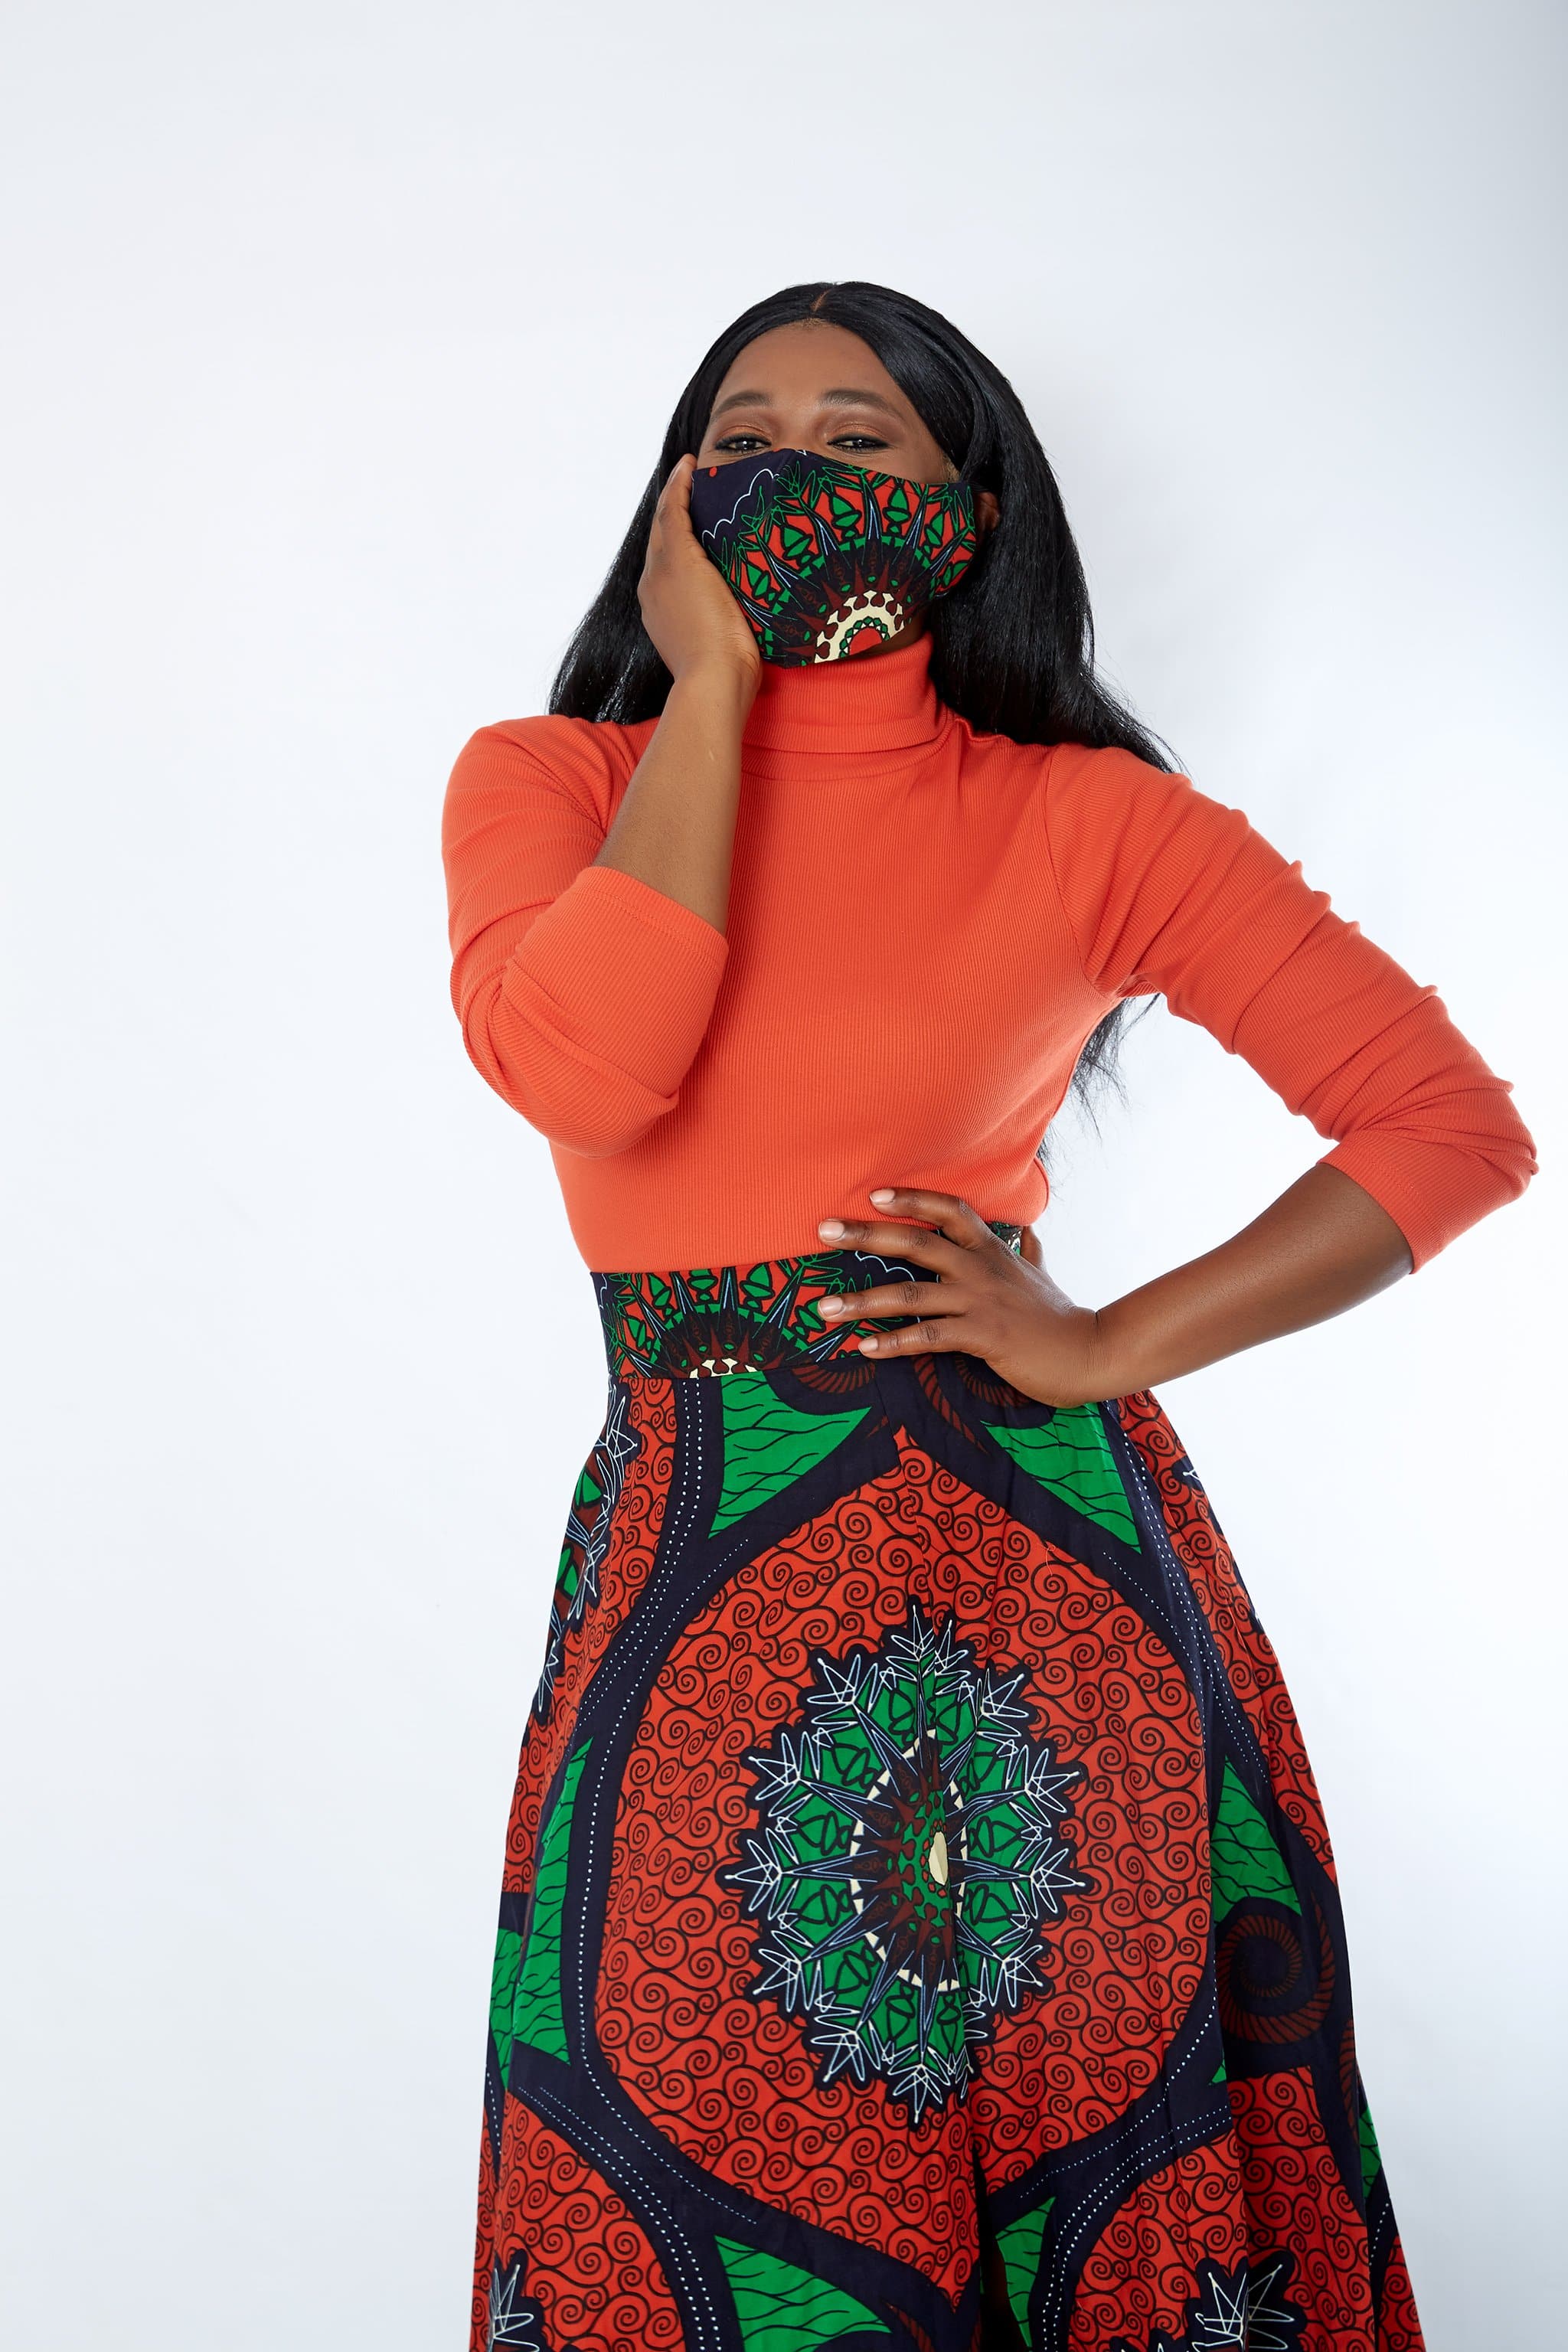 New in 3-D African Print Facemask | Reusable African Print Facemask - Clare - African Clothing from CUMO LONDON